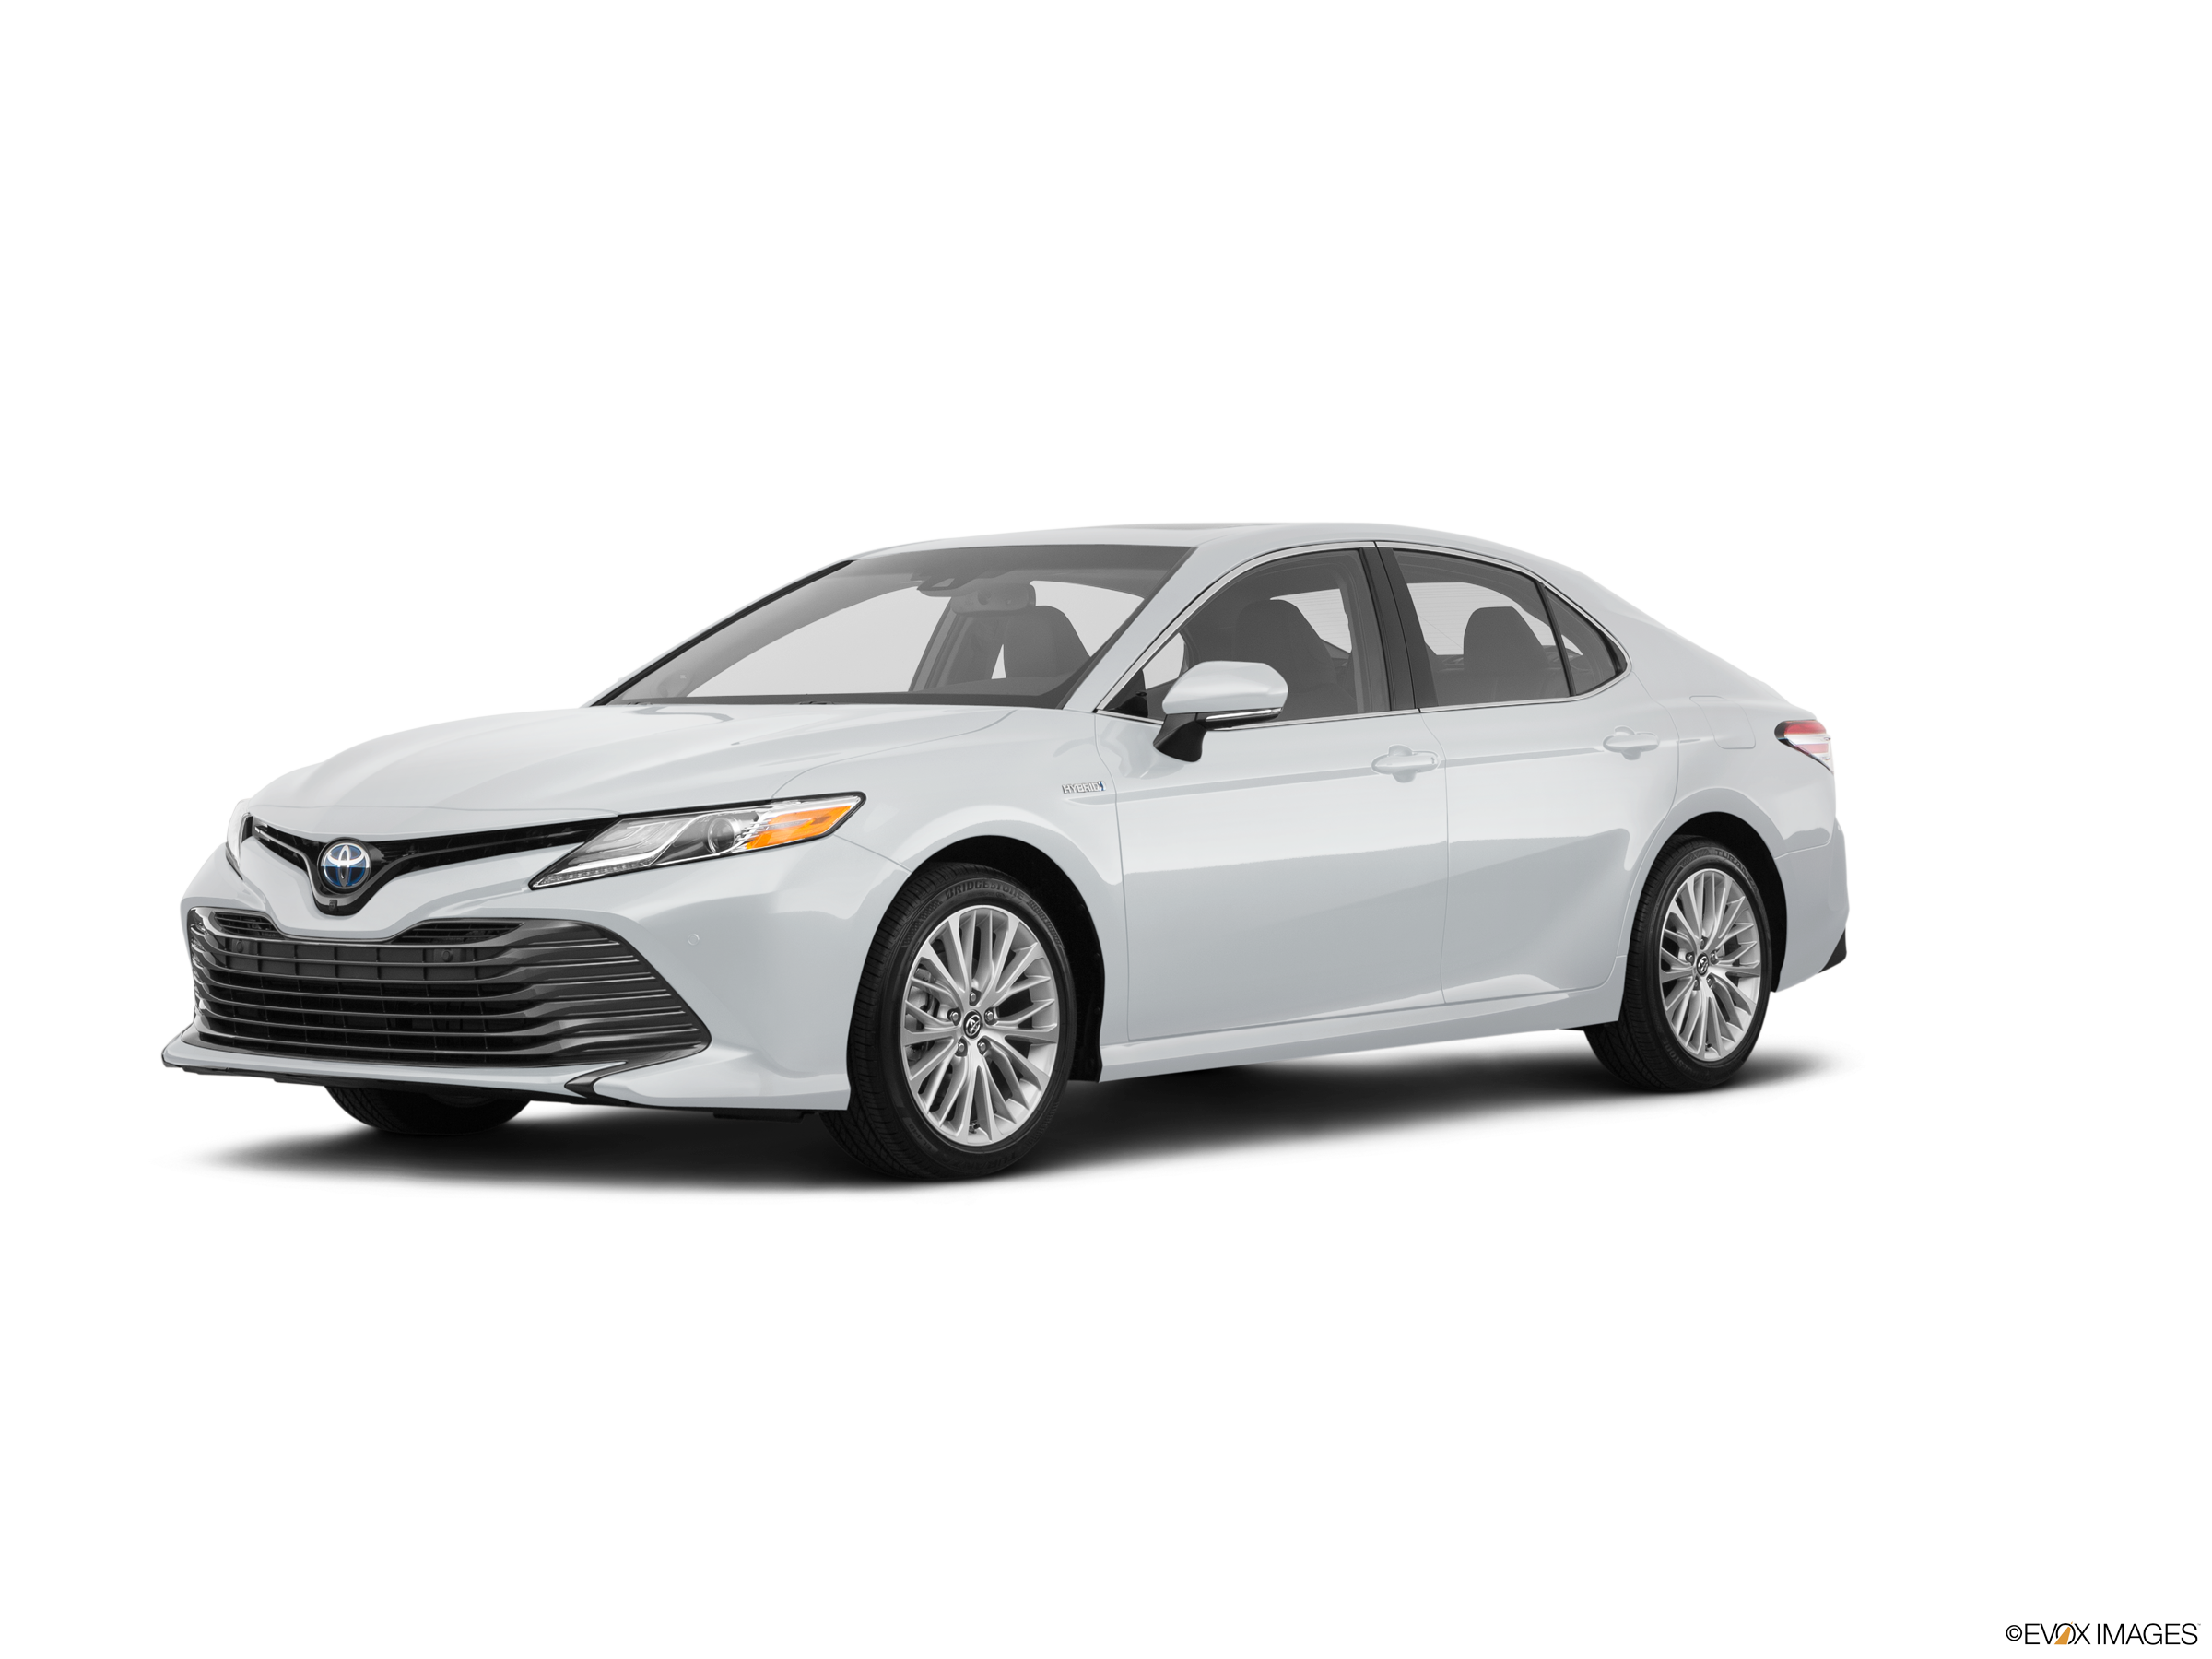 2018 Toyota Camry interior technology upgrades and convenience